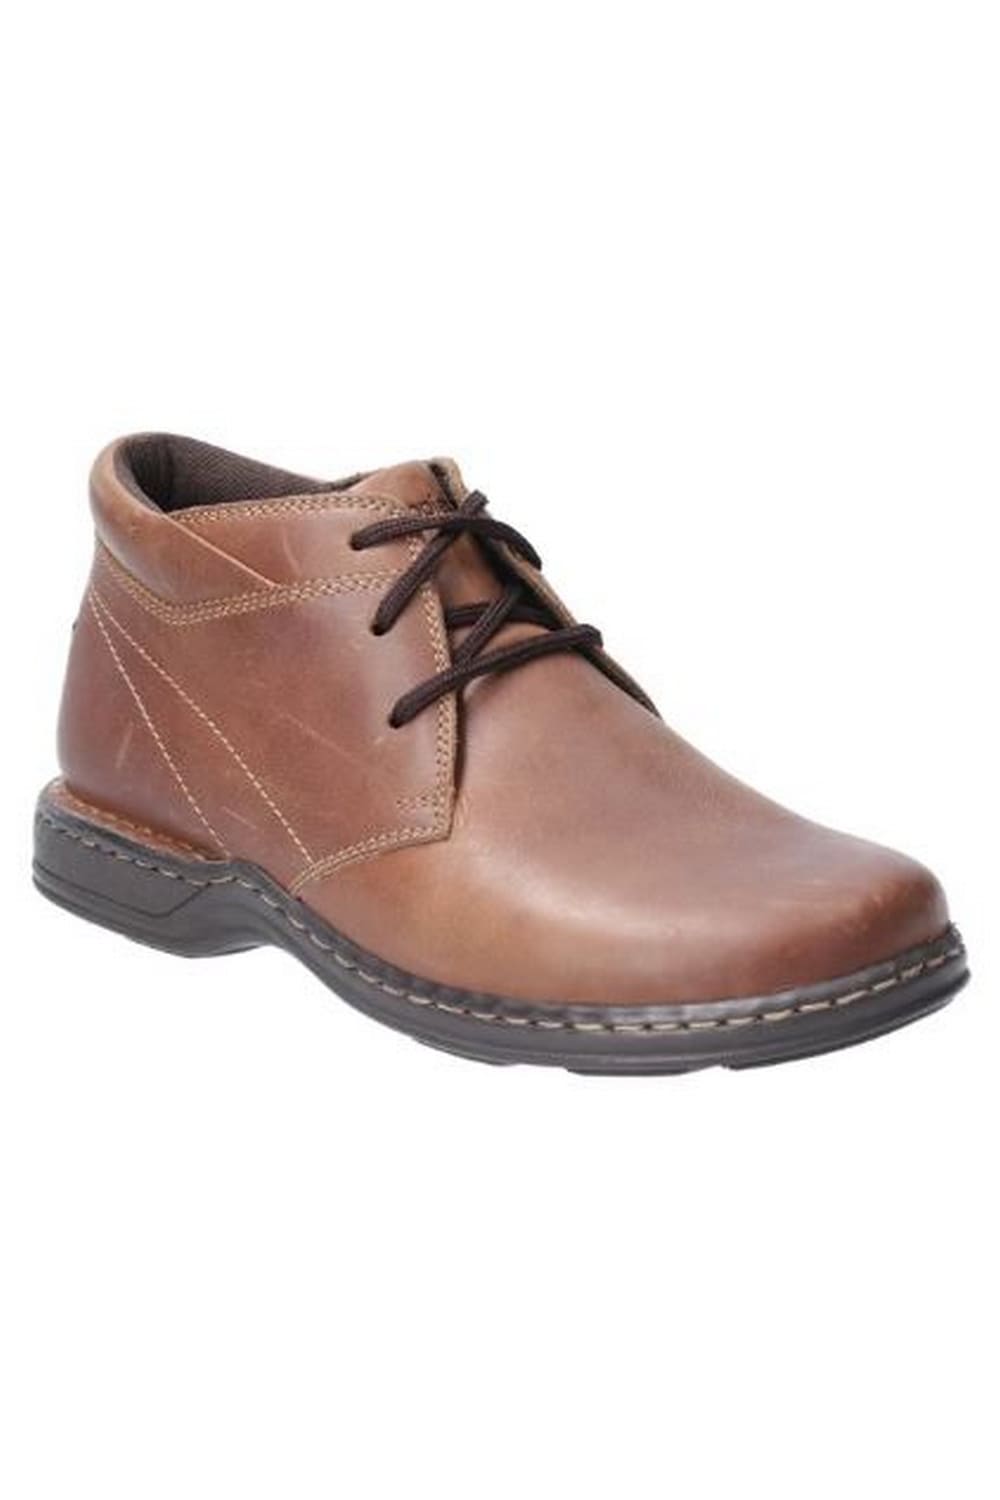 Reggie Mens Lace Up Leather Shoe - Brown